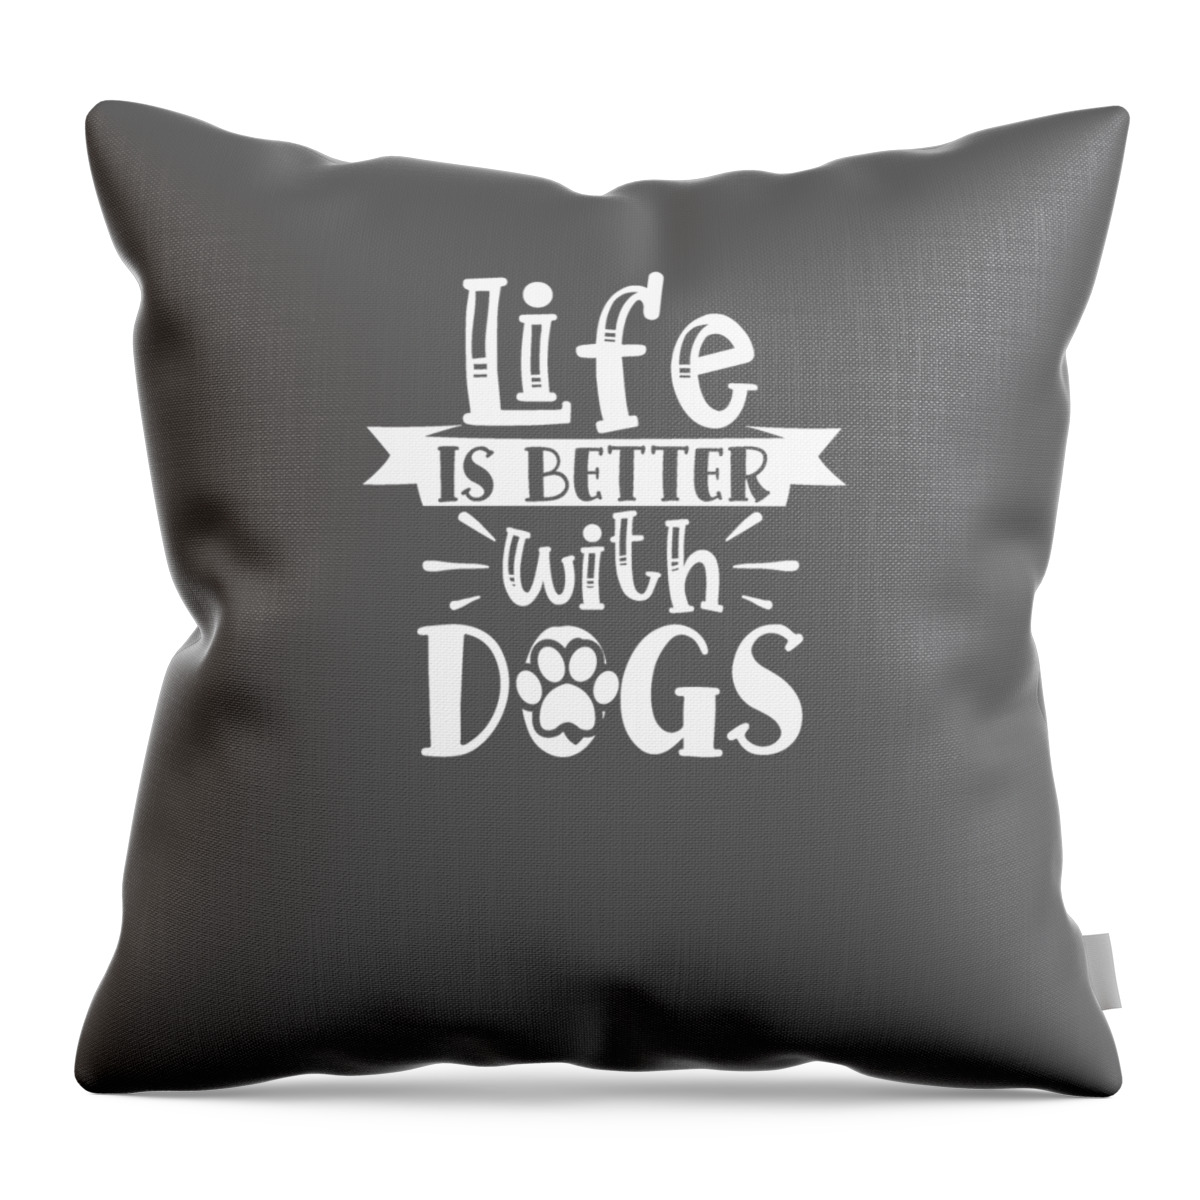 Funny Dog Quotes Life is Better With Dogs Throw Pillow by Stacy McCafferty  - Pixels